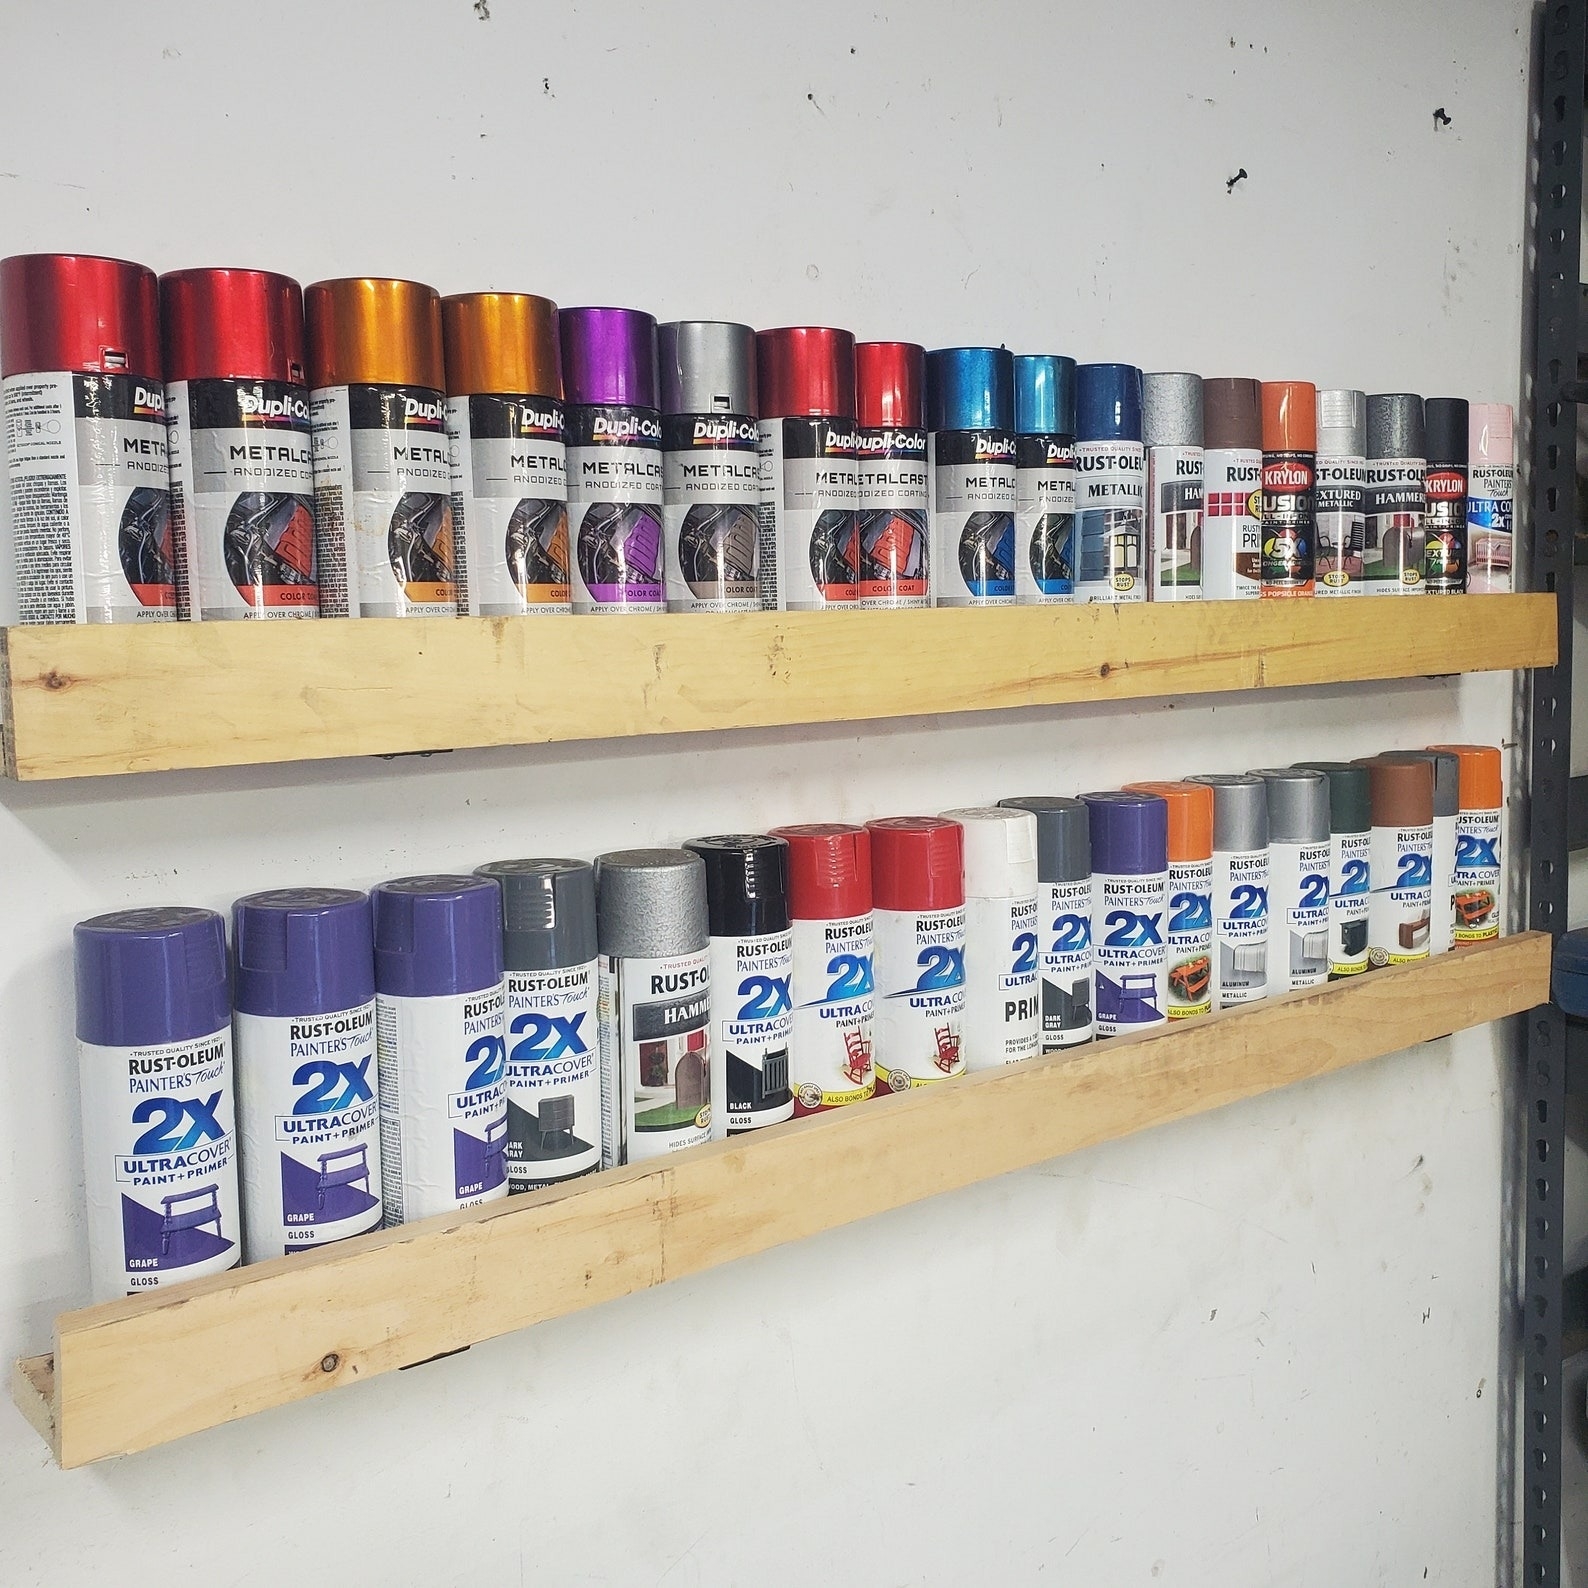 Shelves displaying a variety of spray paint cans in different finishes and brands